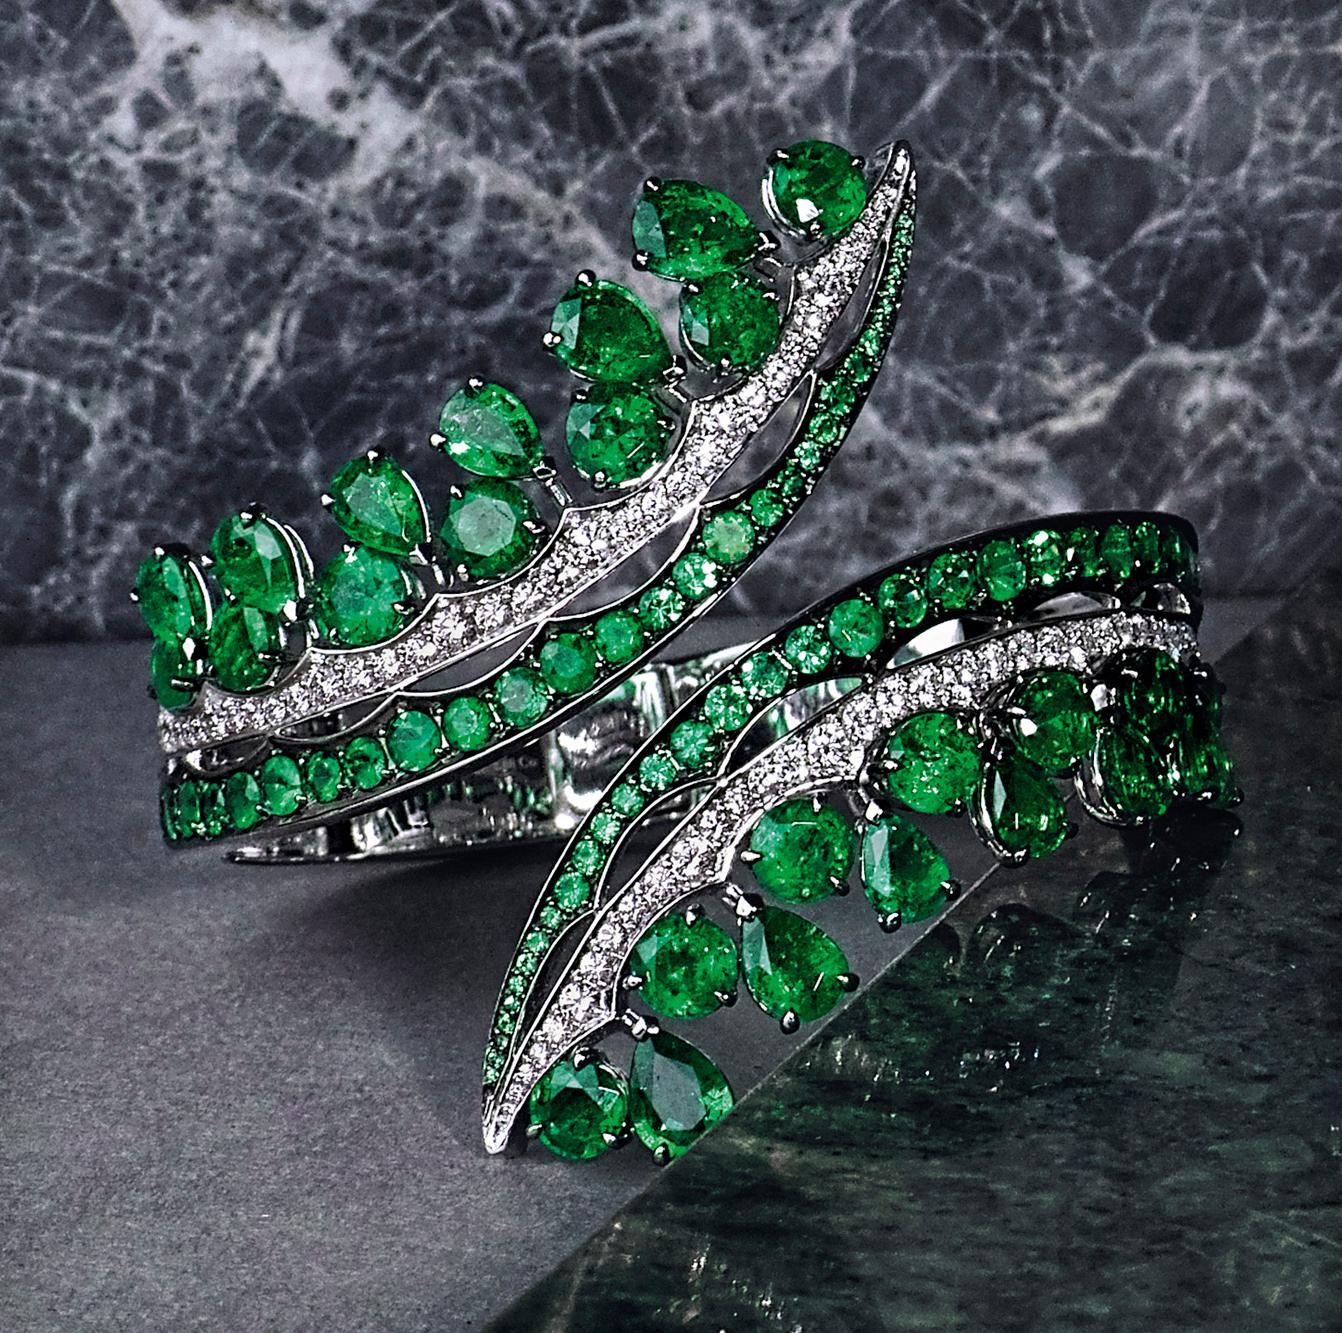 18 Karat Gold Diamonds and Ethically Sourced Emeralds Bracelet and Cocktail Ring 5